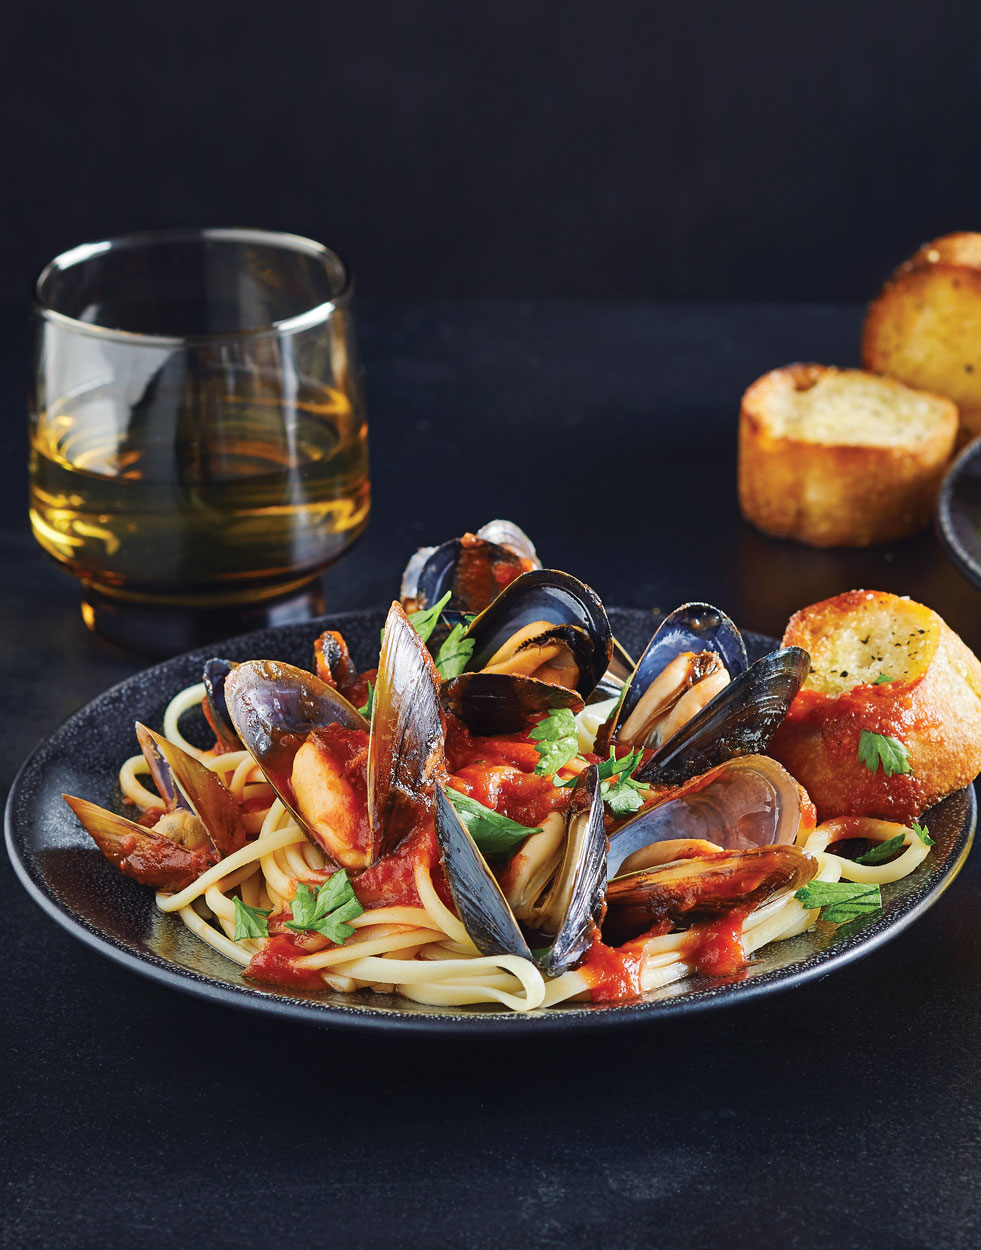 Mussels Fra Diavolo with linguine